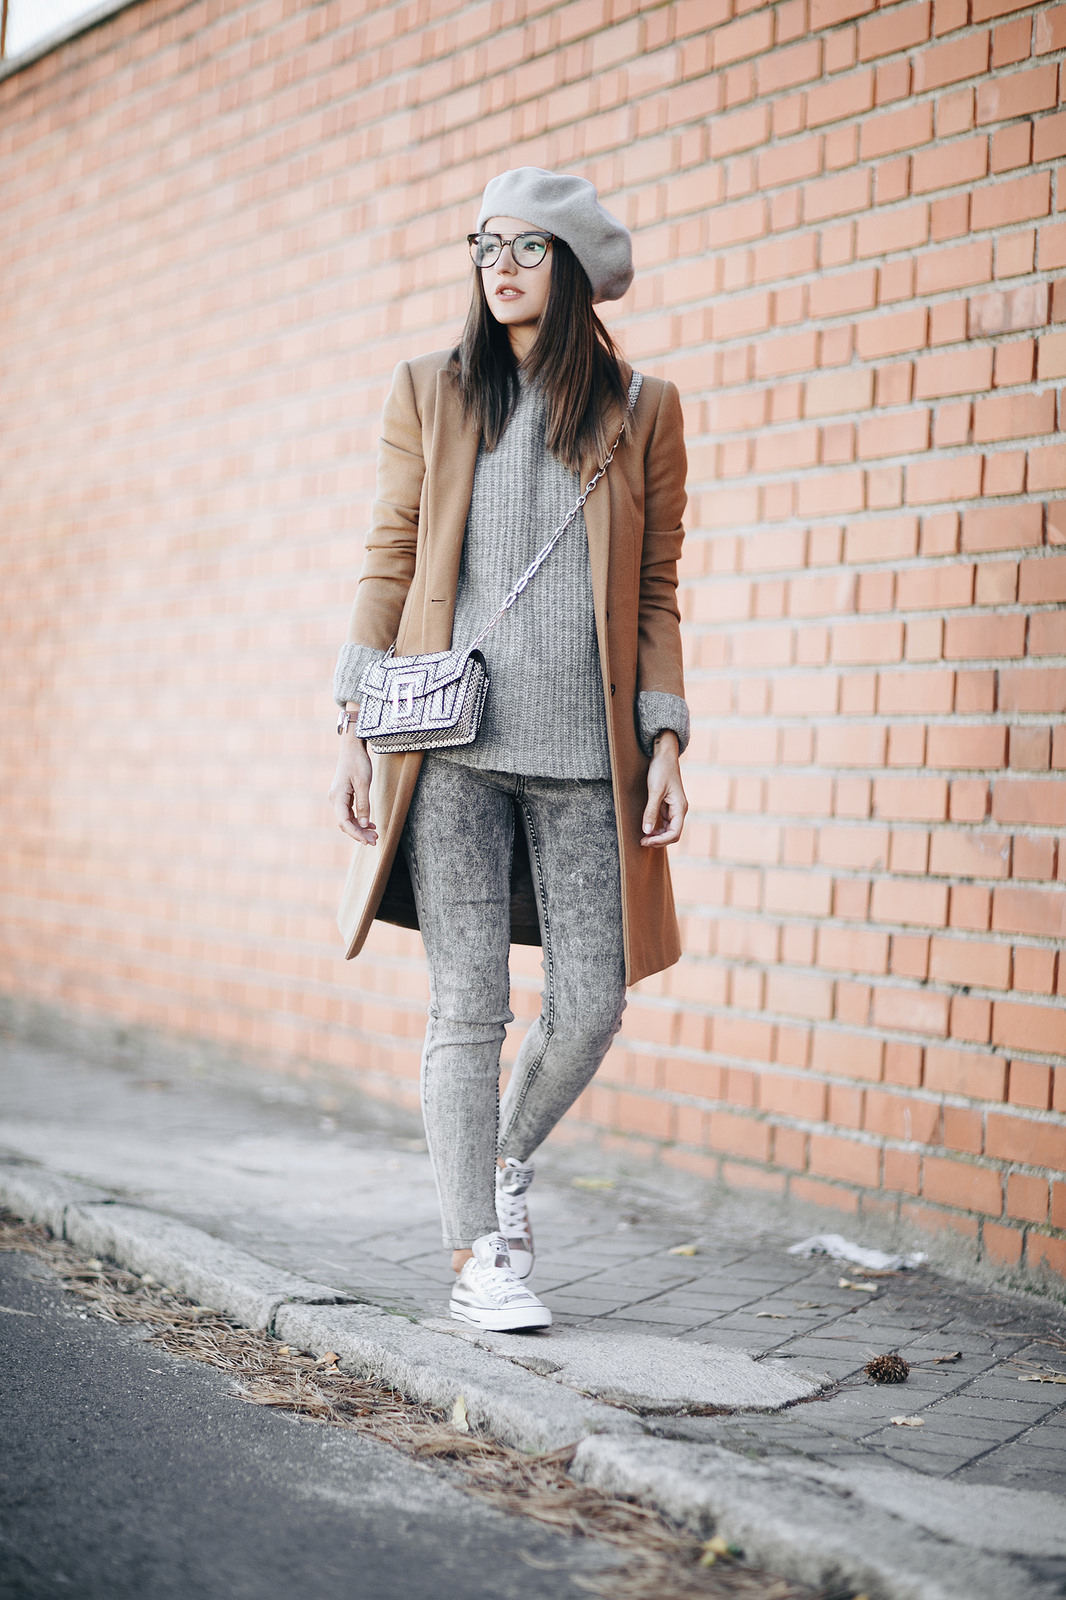 15 Winter Outfit Ideas You're Going to LOVE - fashionsy.com